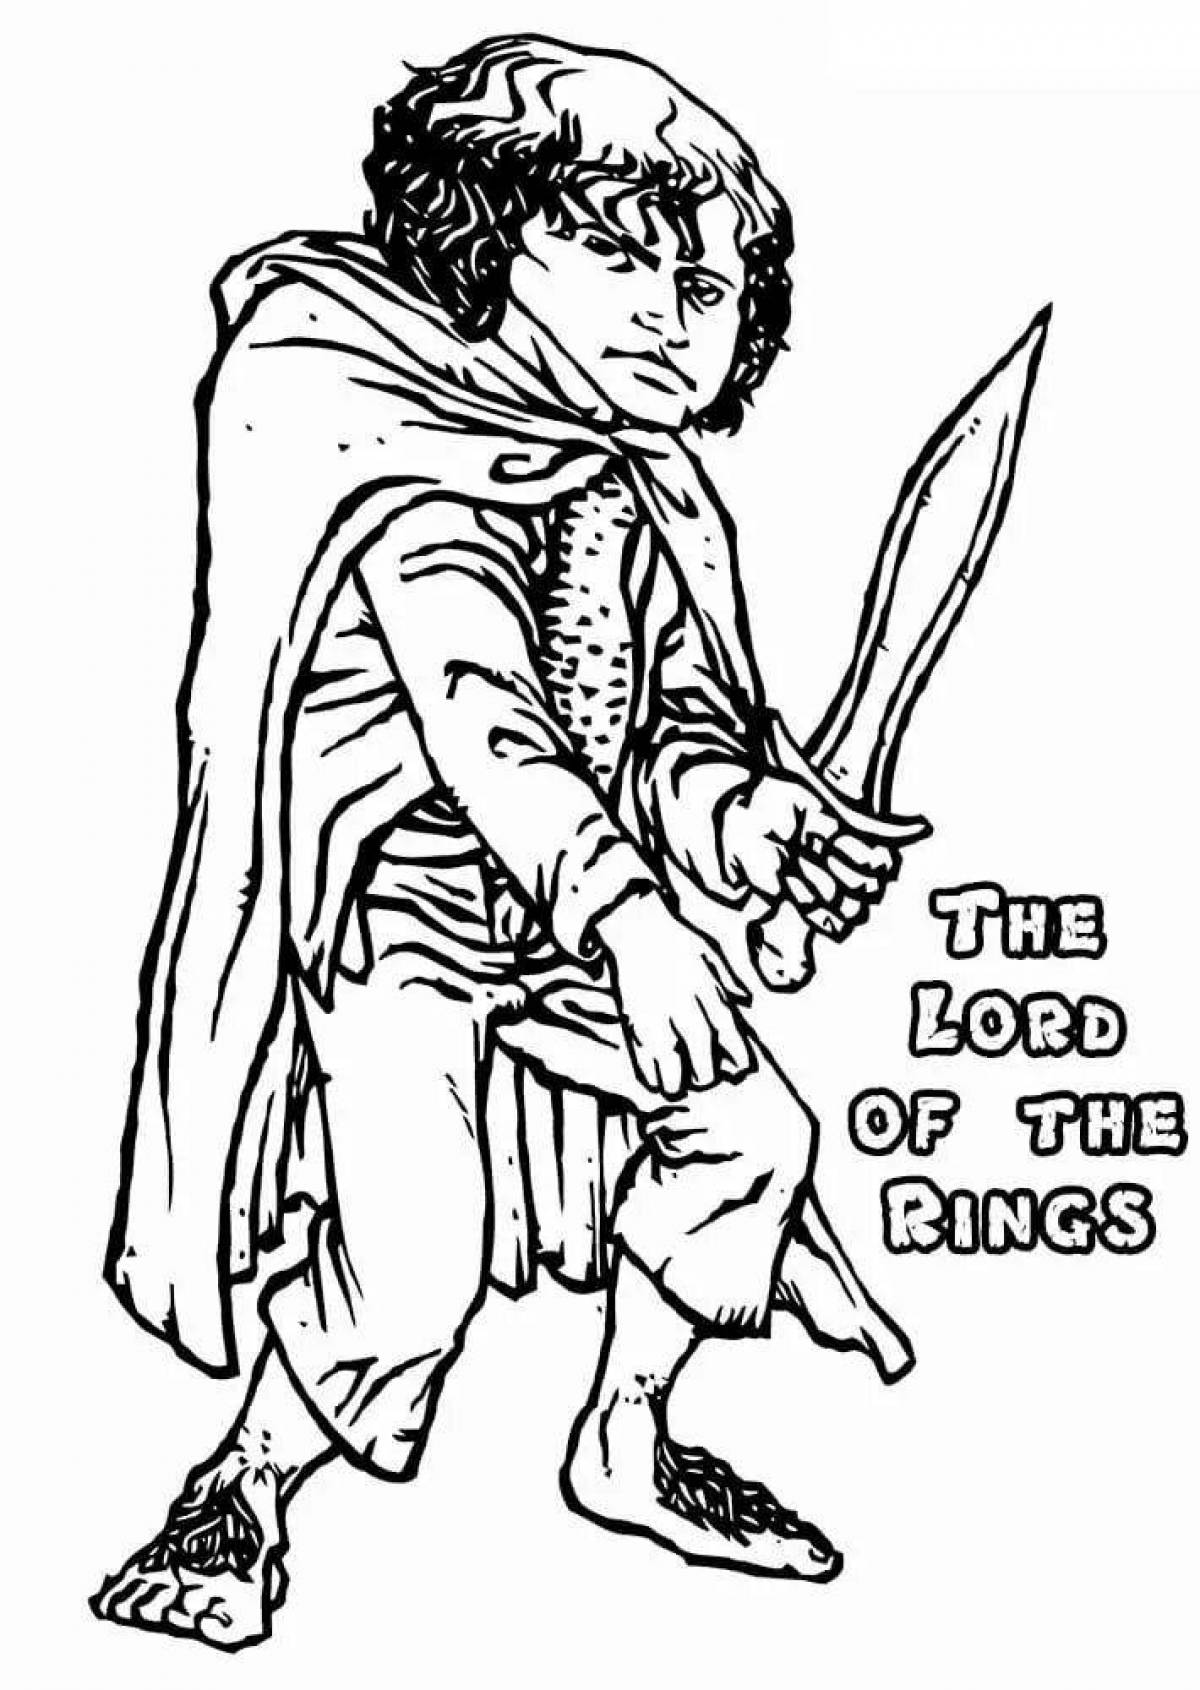 The Lord of the Rings #10